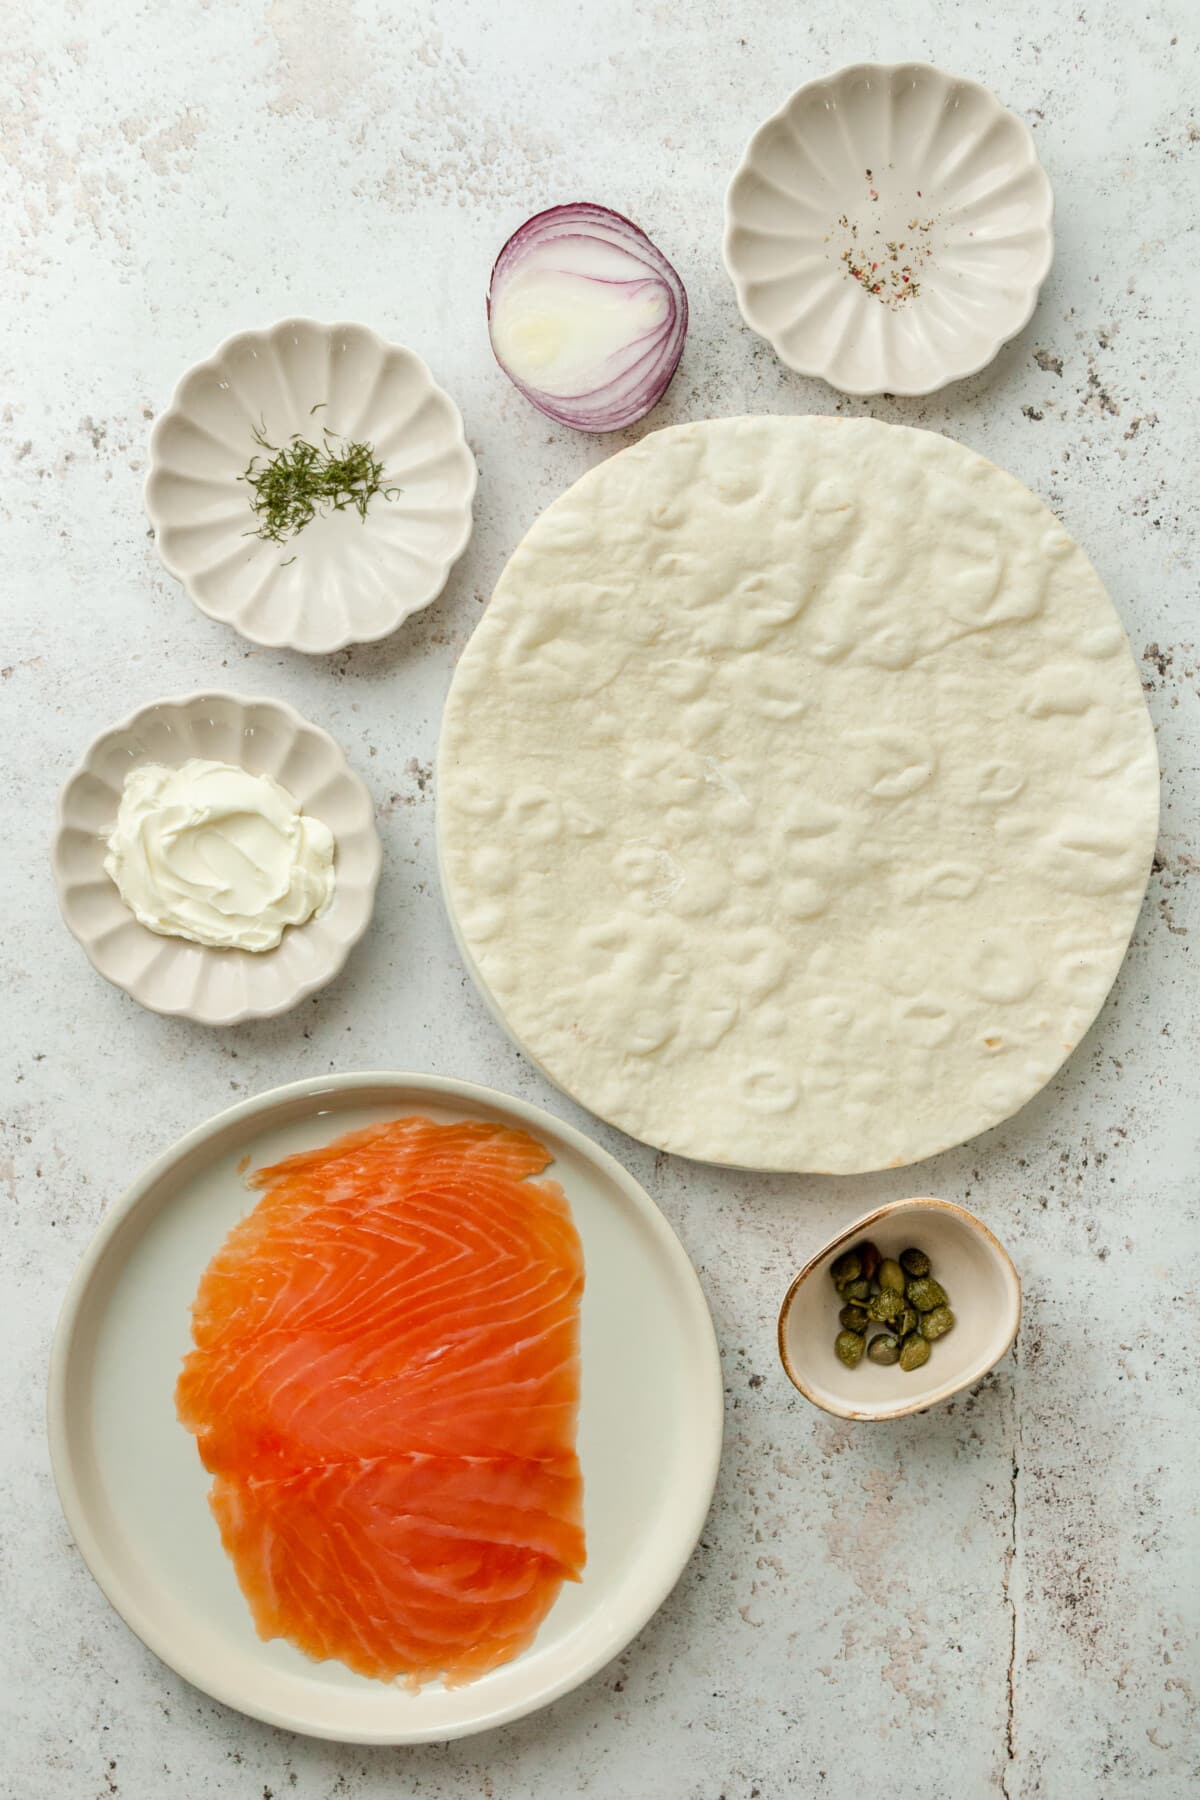 Ingredients for smoked salmon lunch wraps sit in a variety of bowls and plates on a light grey surface.